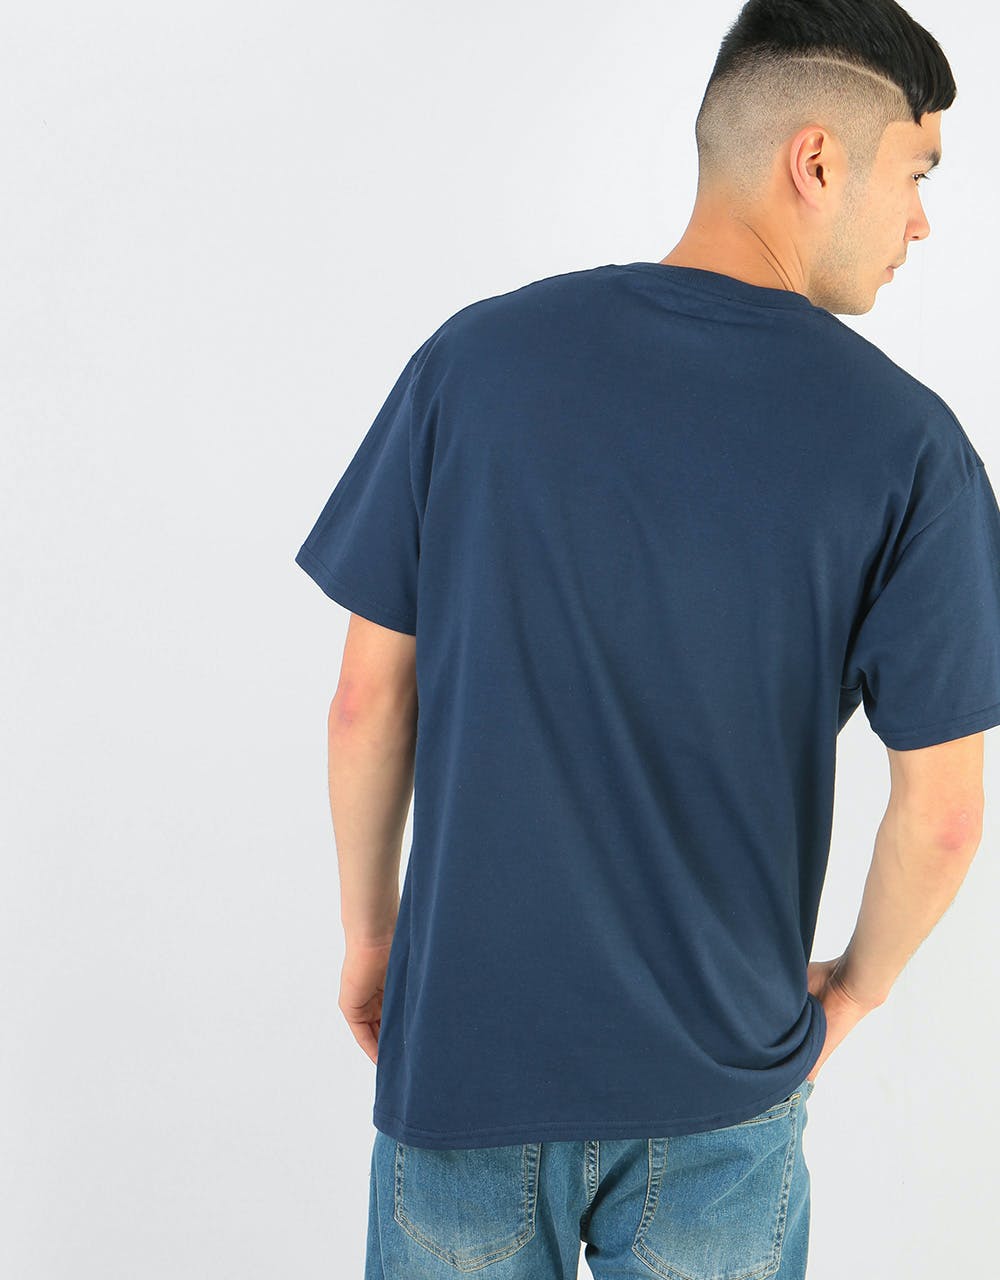 Route One Mirrors Edge T-Shirt - Navy